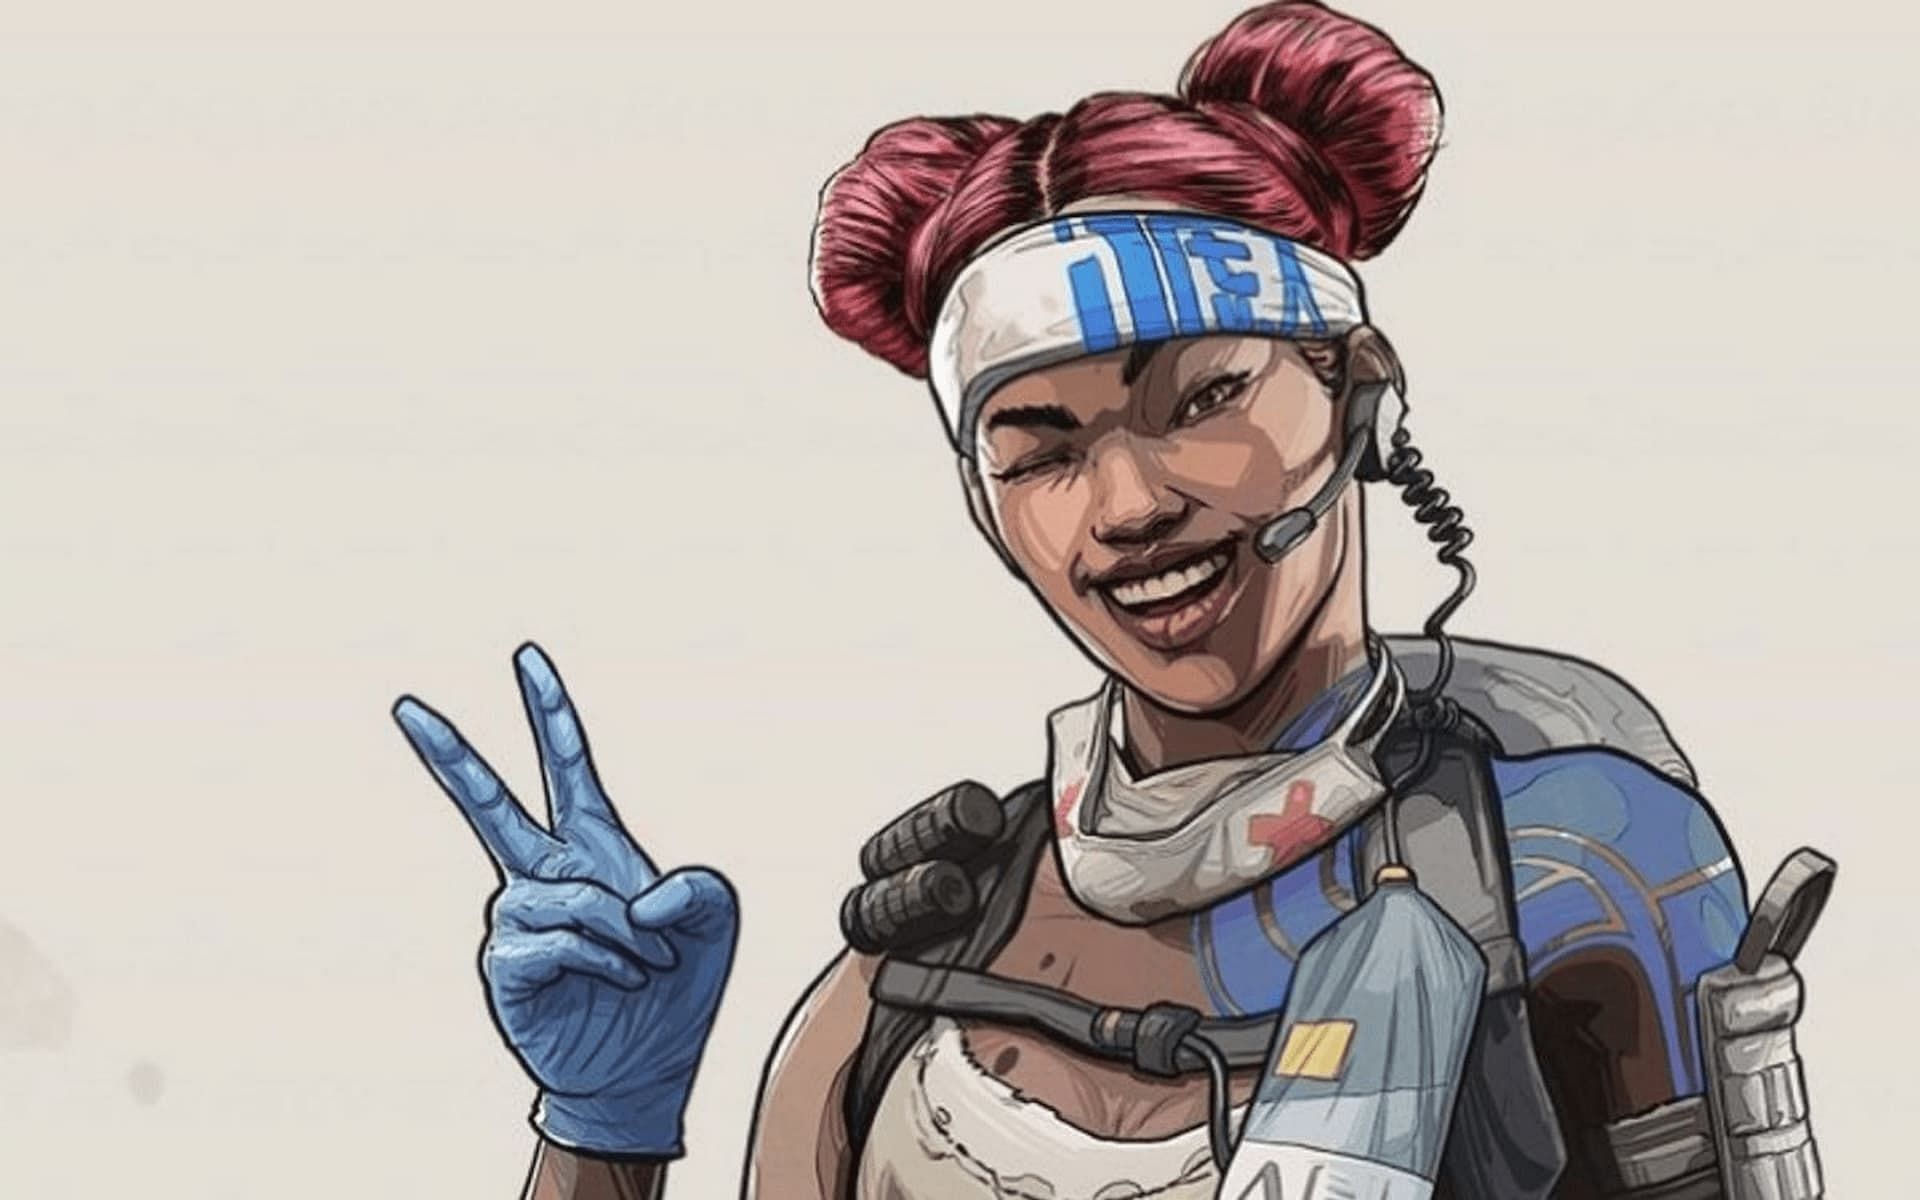 Lifeline is a medical support character in Apex Legends (Image via Respawn Entertainment)